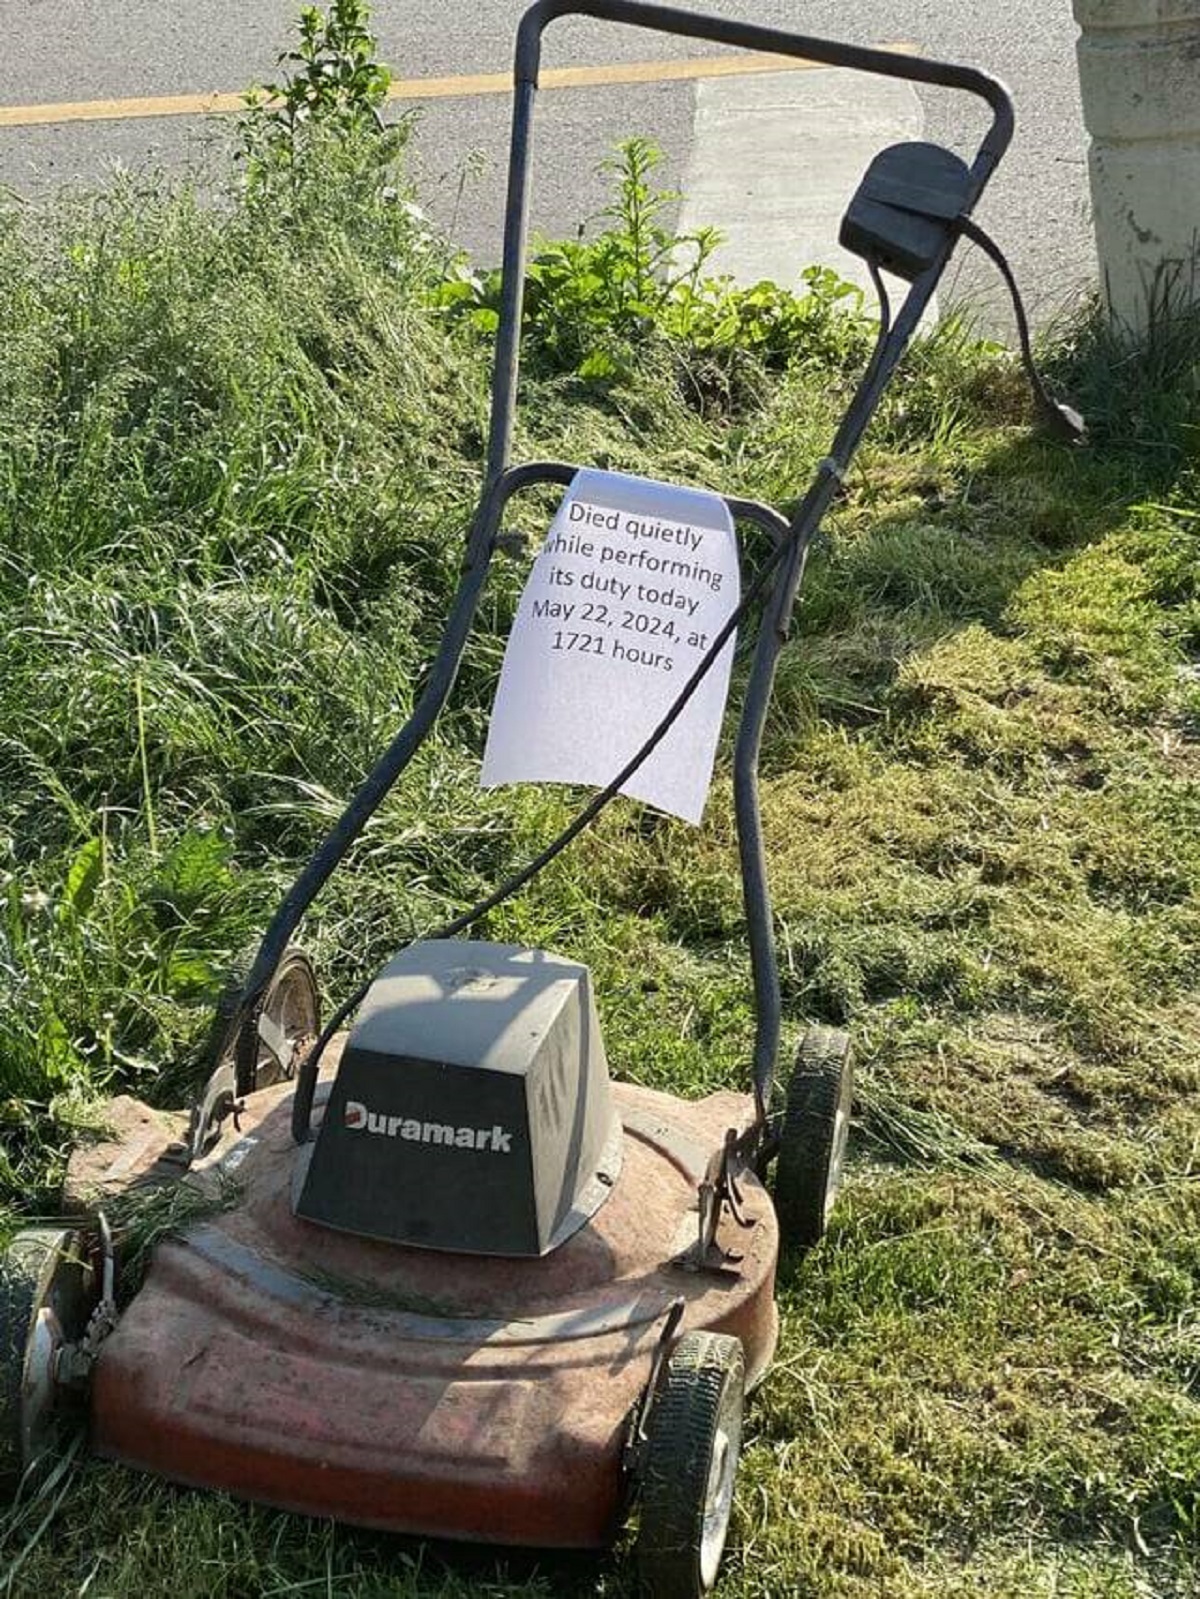 "Someone in the neighborhood wanted to honor their fallen mower."